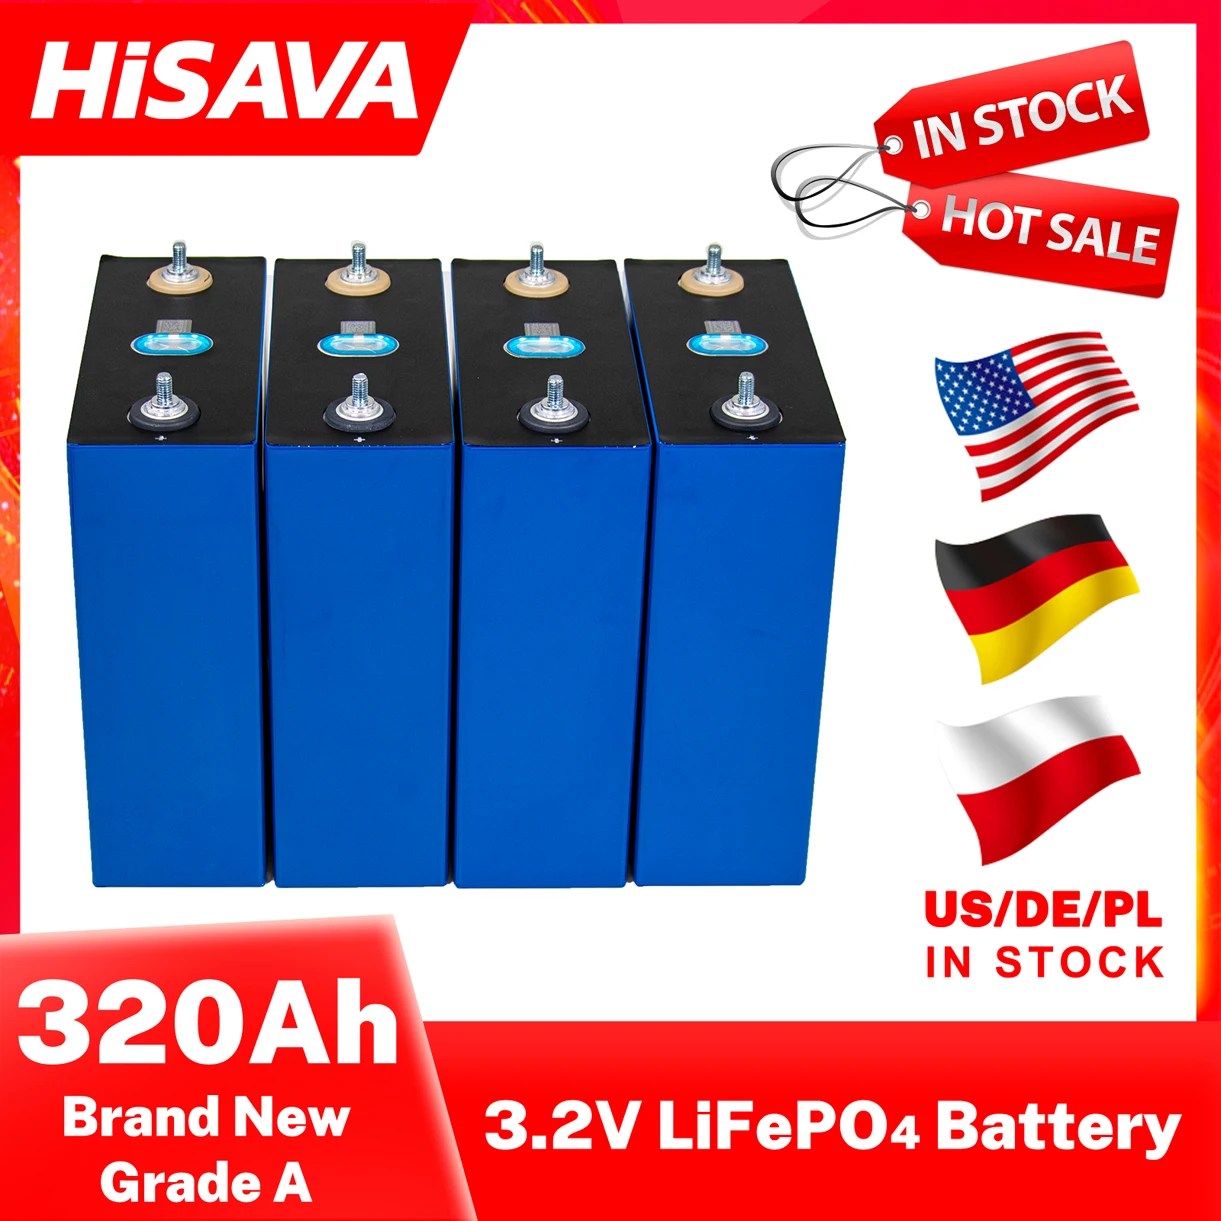 

3.2V 320AH Cells Brand New 48V LiFePO4 280AH Battery 310AH Grade A 12V 24V Rechargeable Battery Pack EU US Tax Free with Busbars